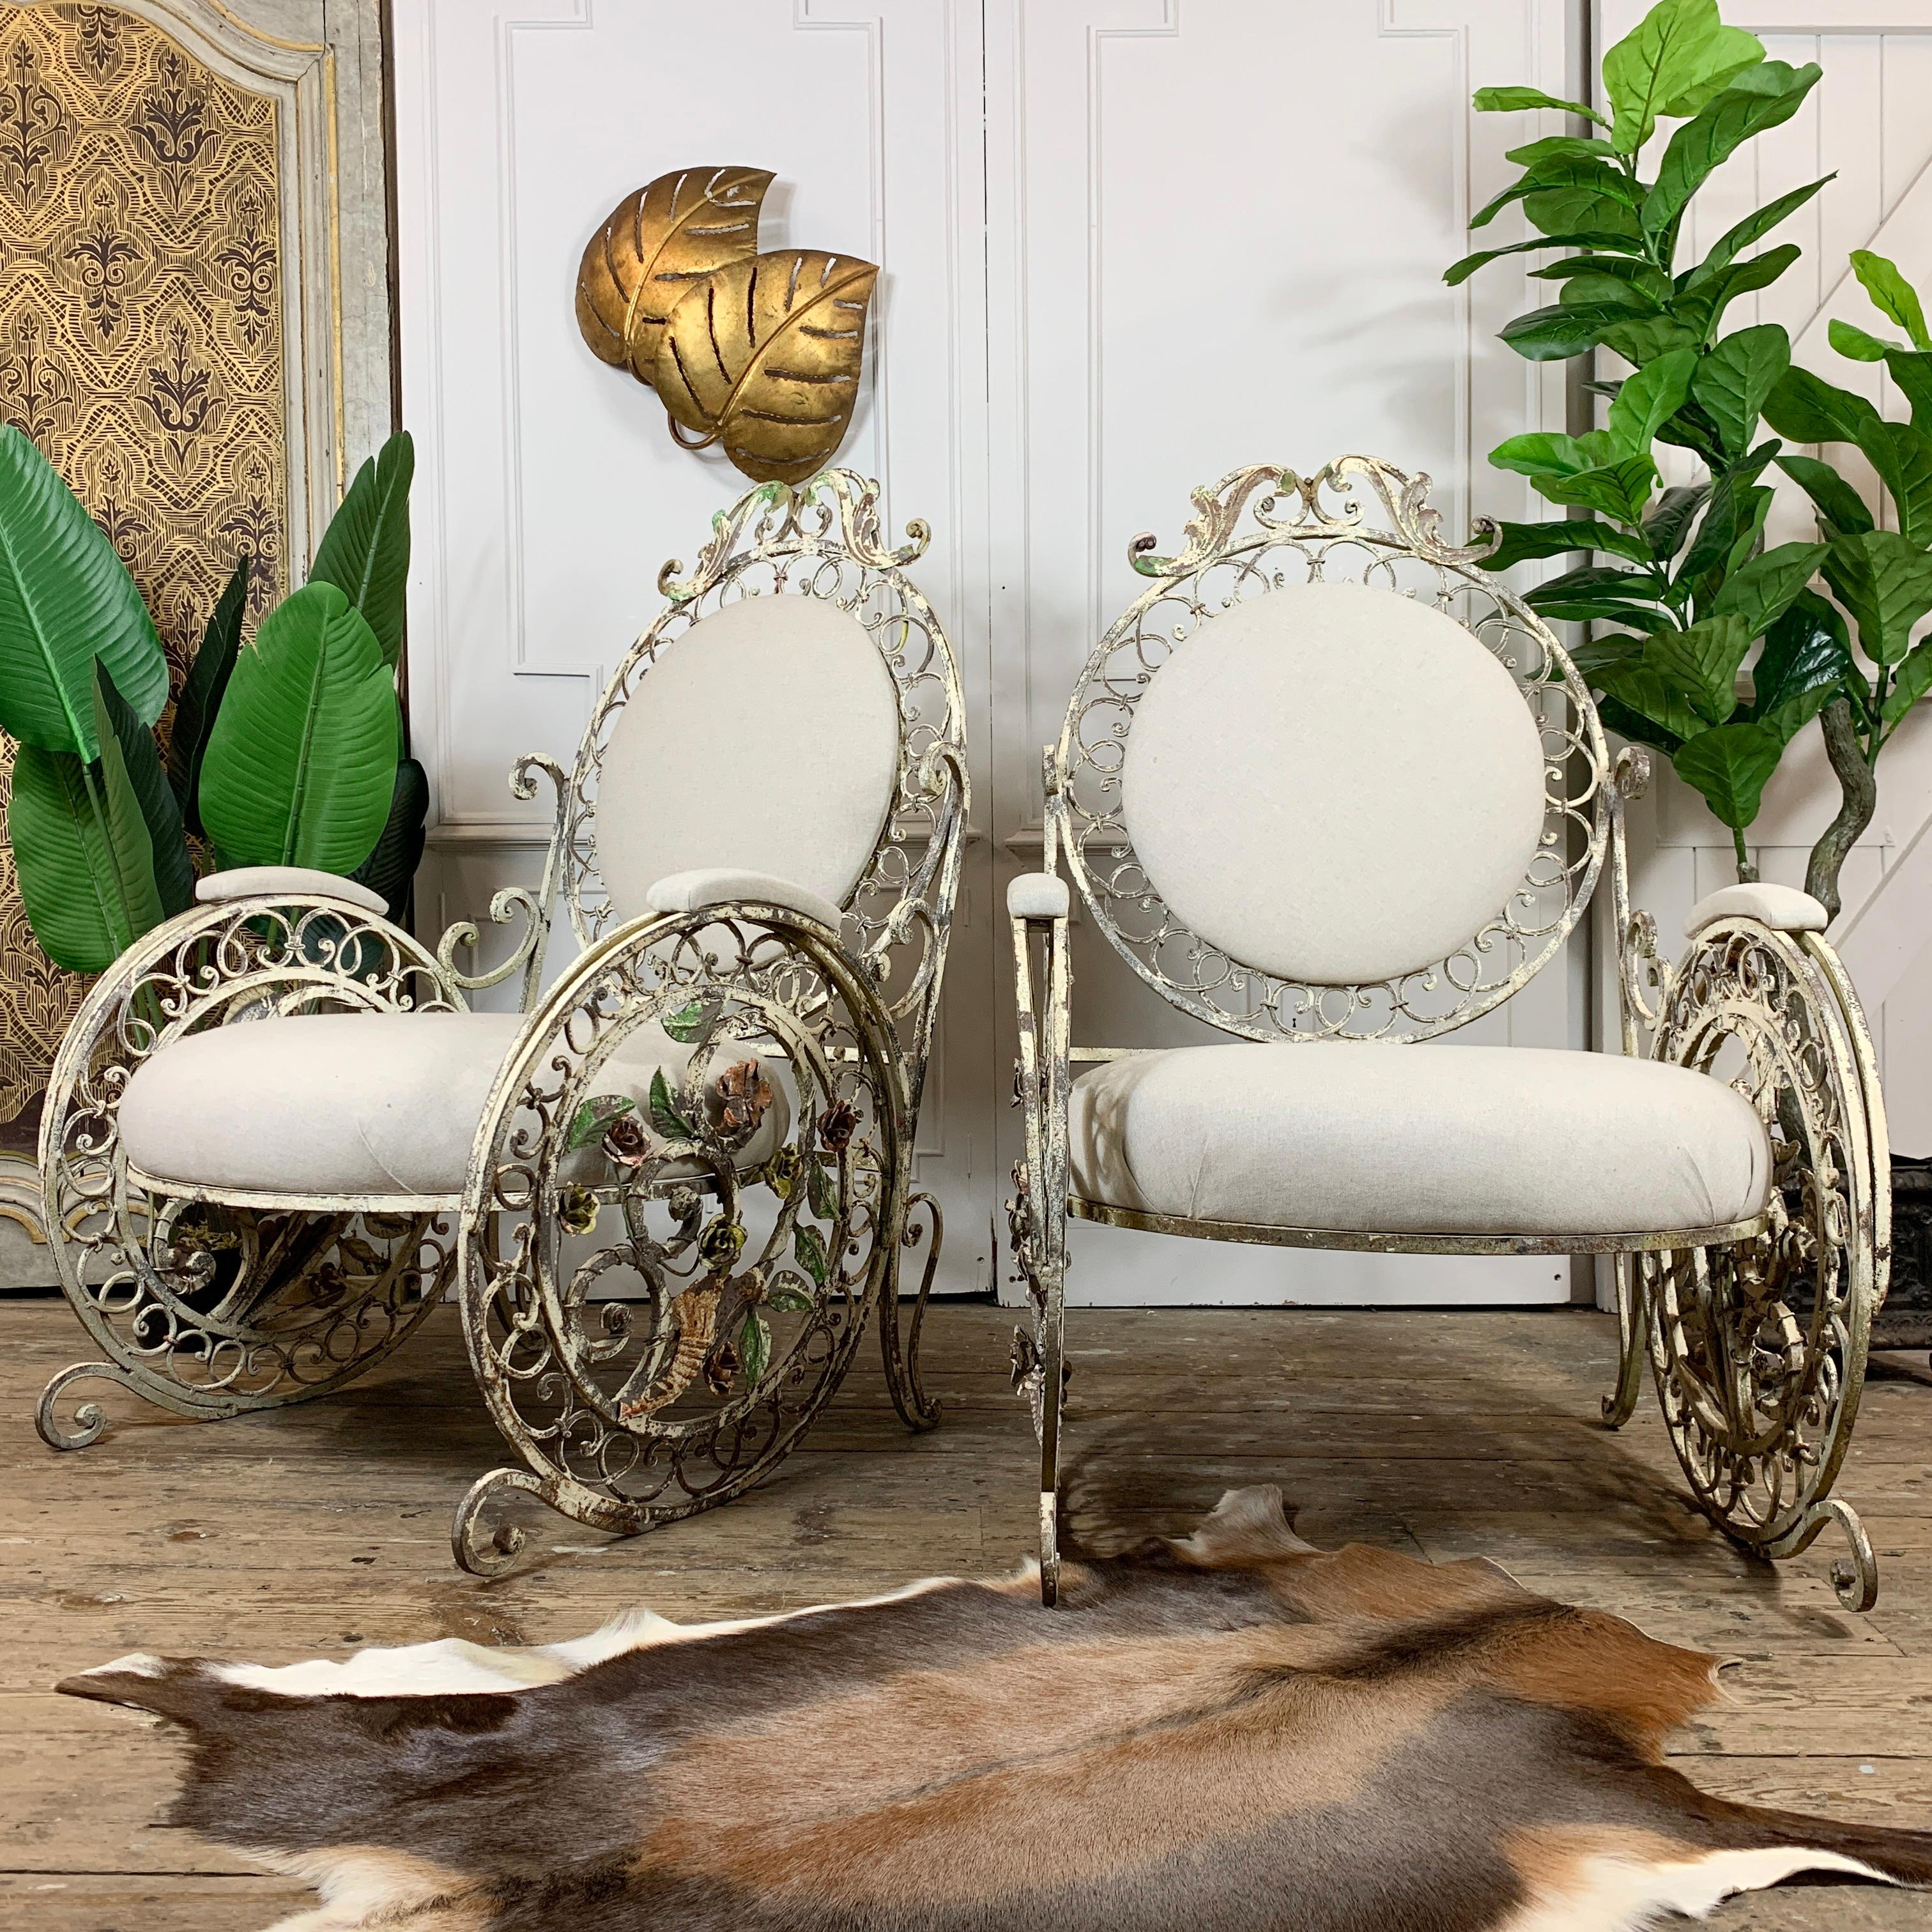 Art Nouveau Late 19th Century White Wrought Iron French Chairs For Sale